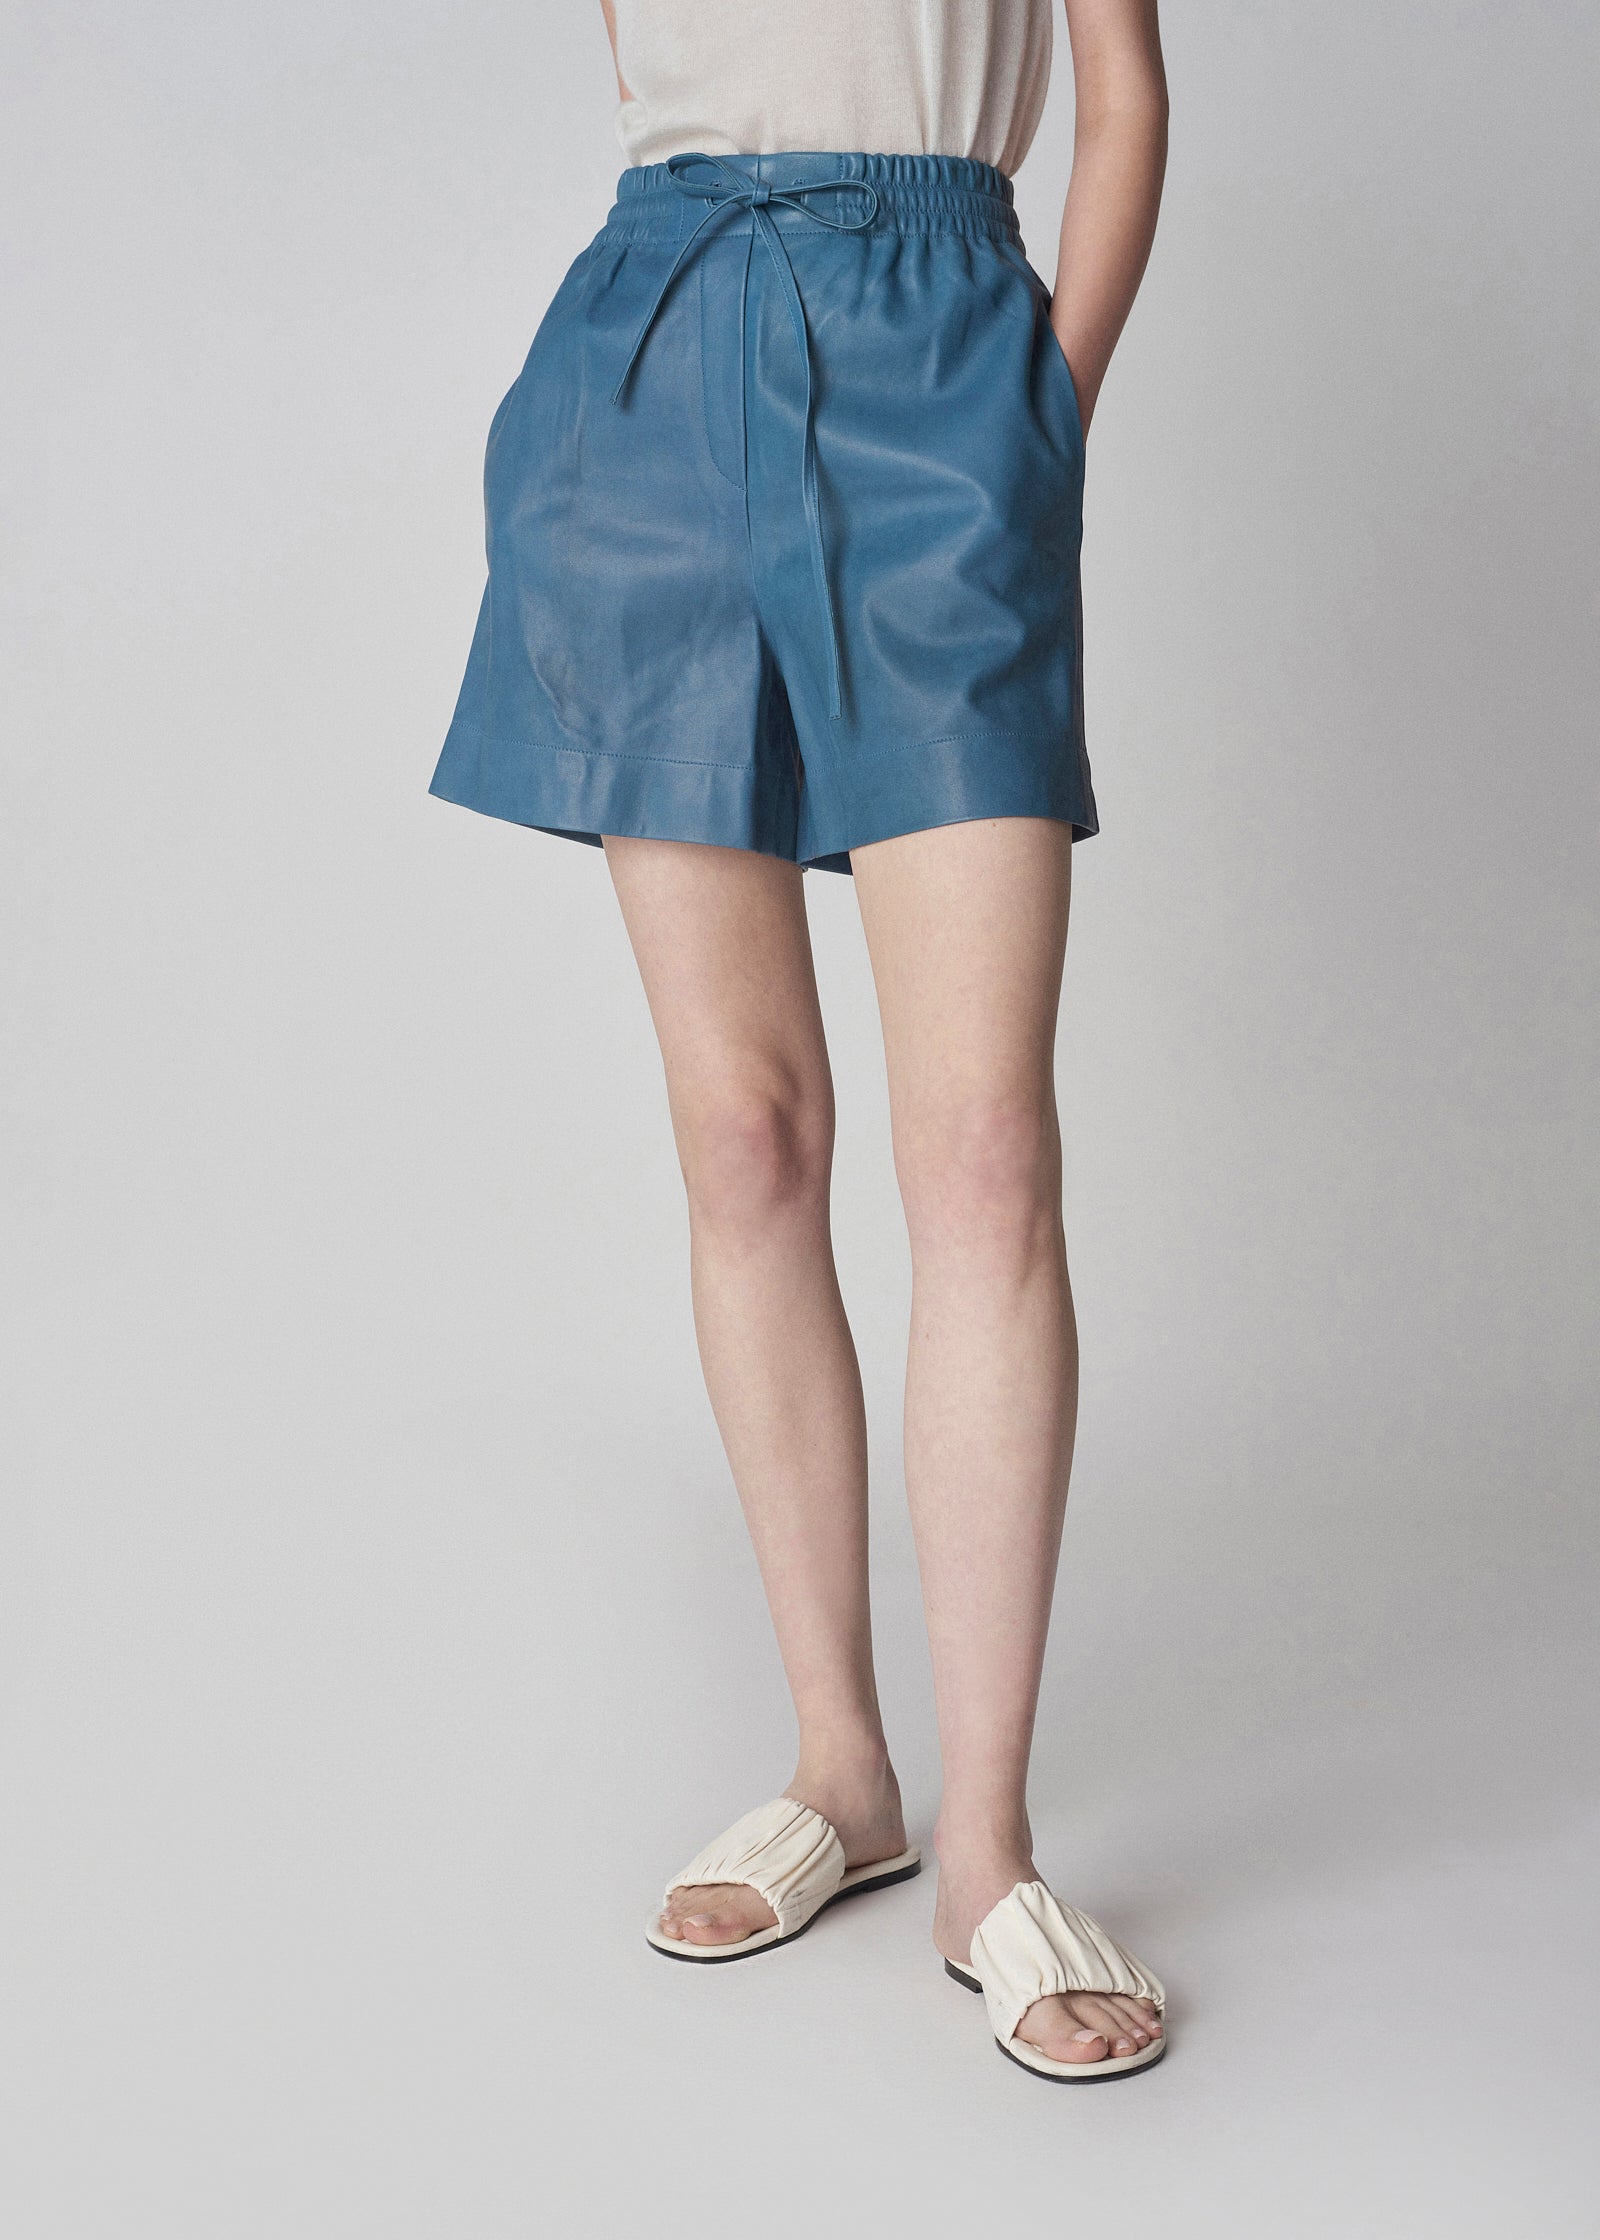 Elastic Waist Short in Lambskin - Blue - CO Collections